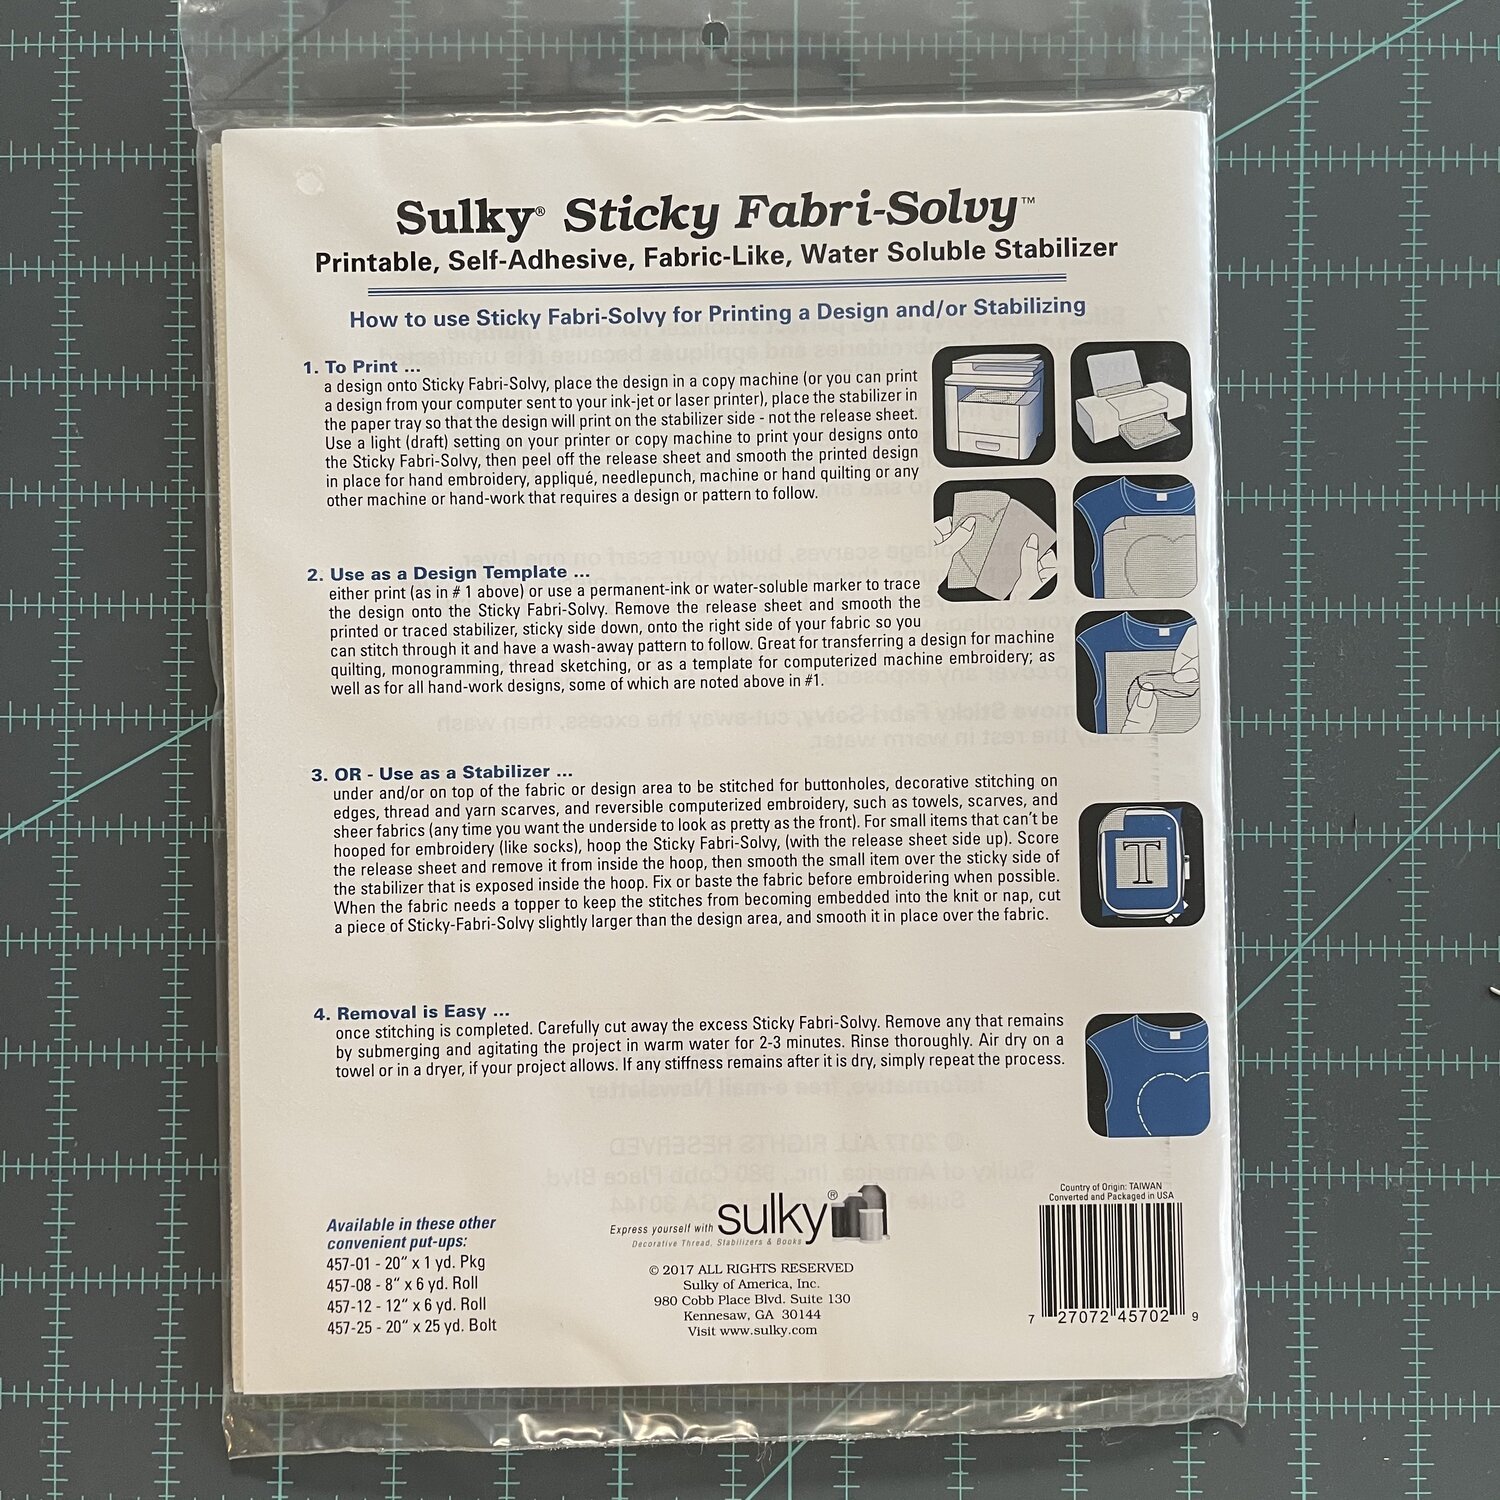 Printable, Water-Soluble Sulky Fabri-Solvy